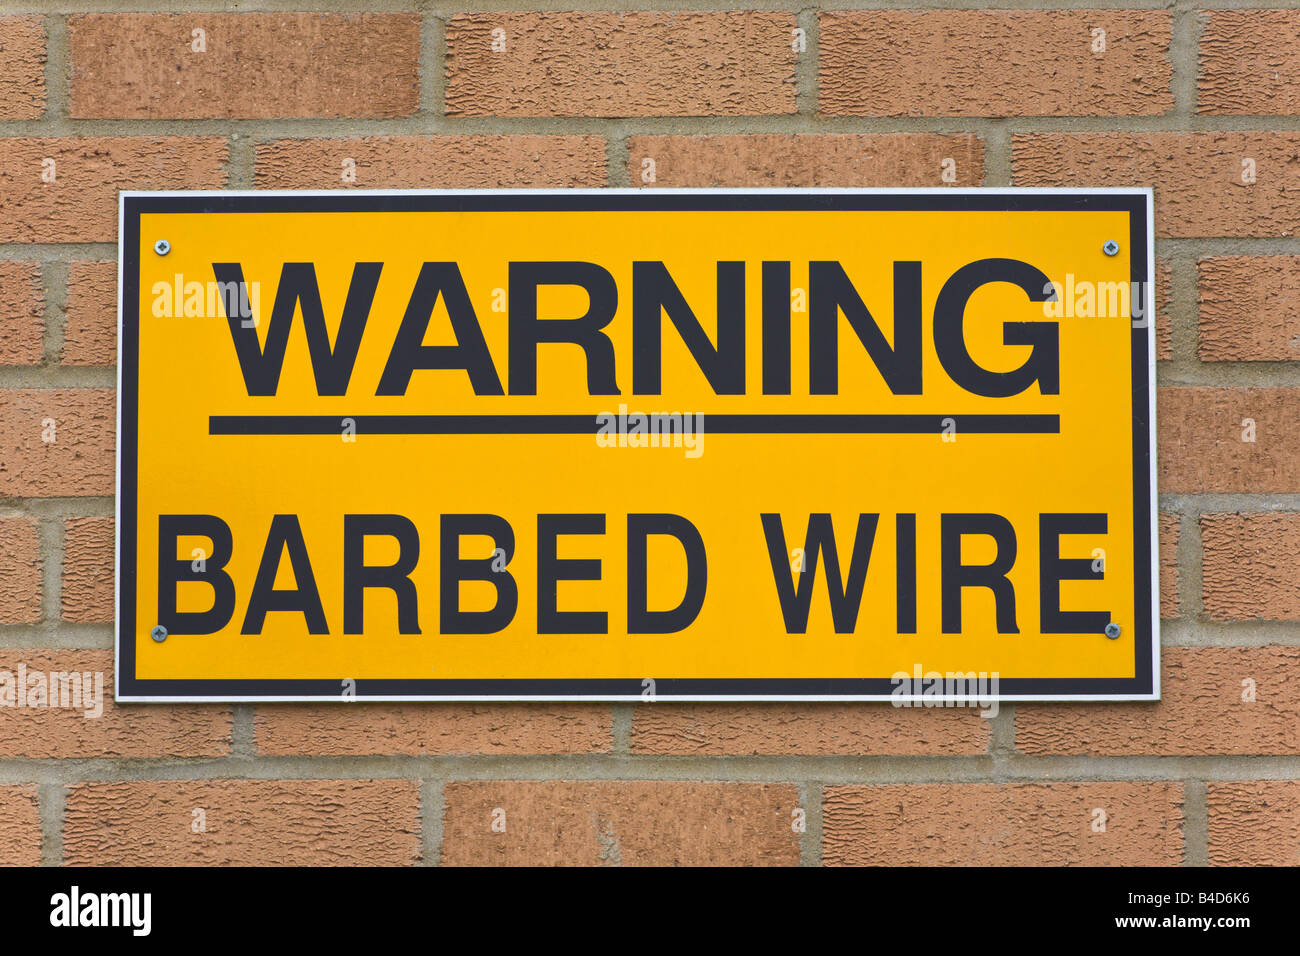 Barbed Wire sign on building, England Stock Photo